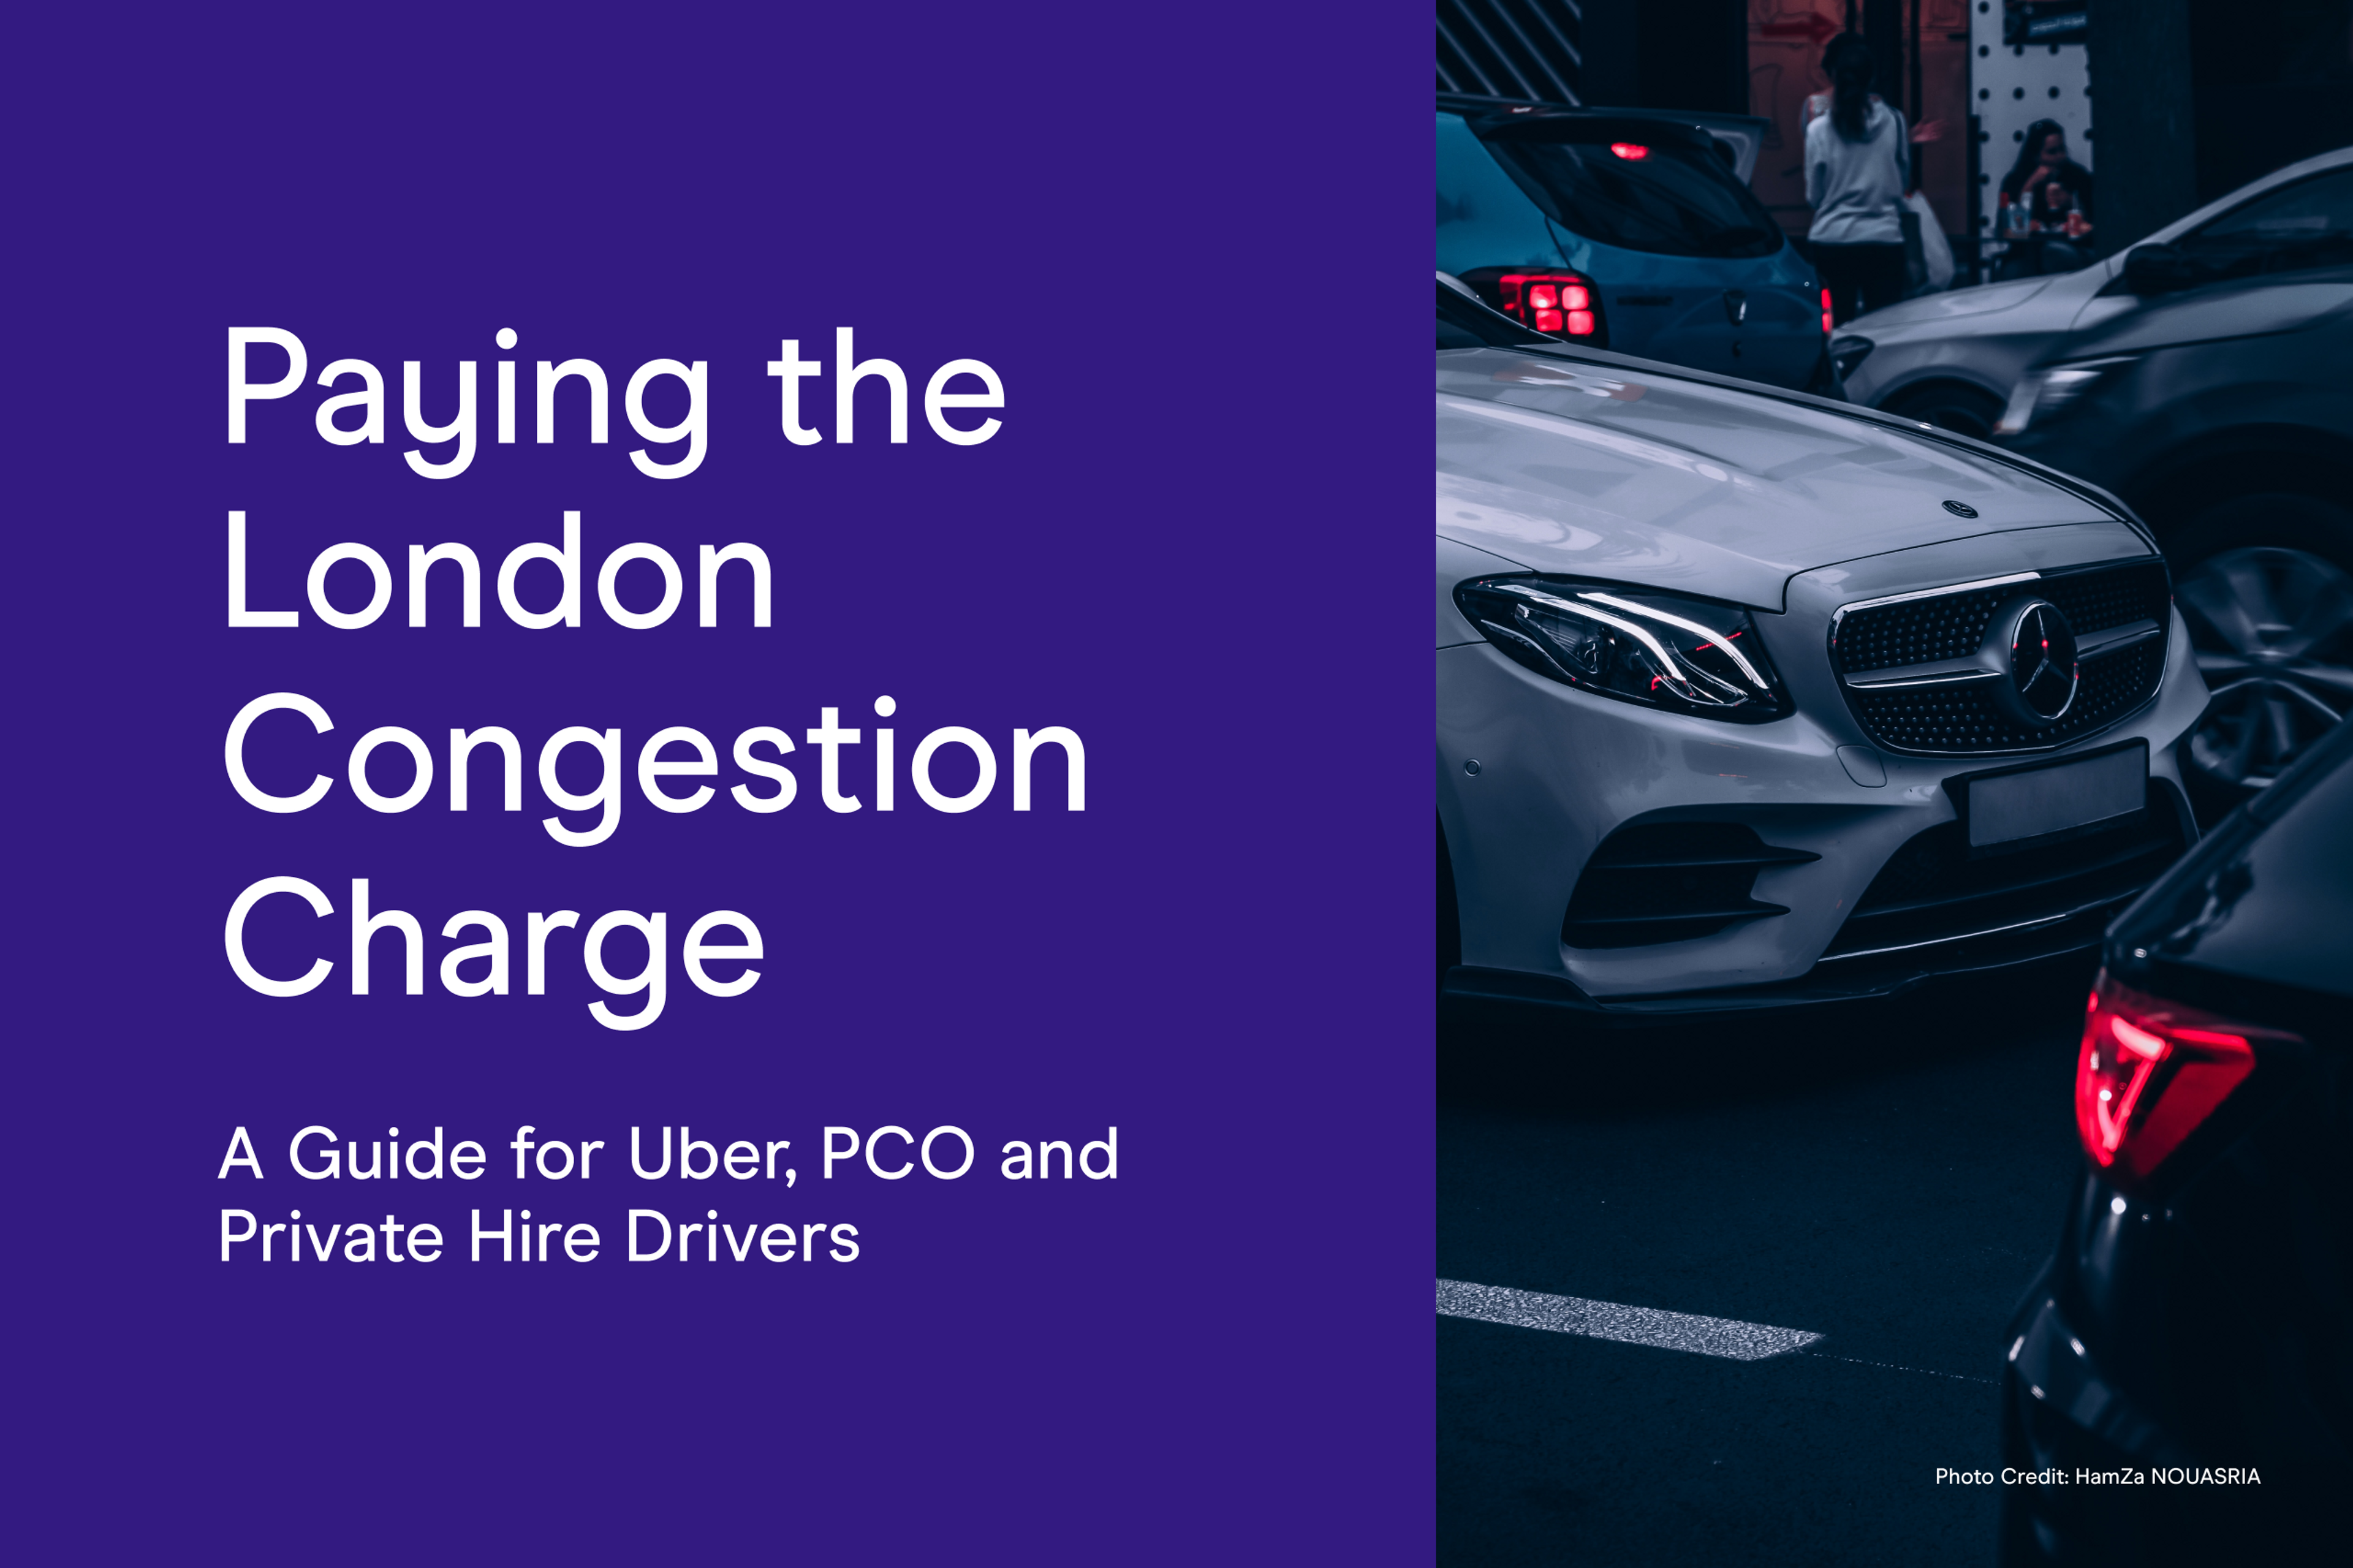 Paying the London Congestion Charge: A guide for Uber, PCO and private hire drivers